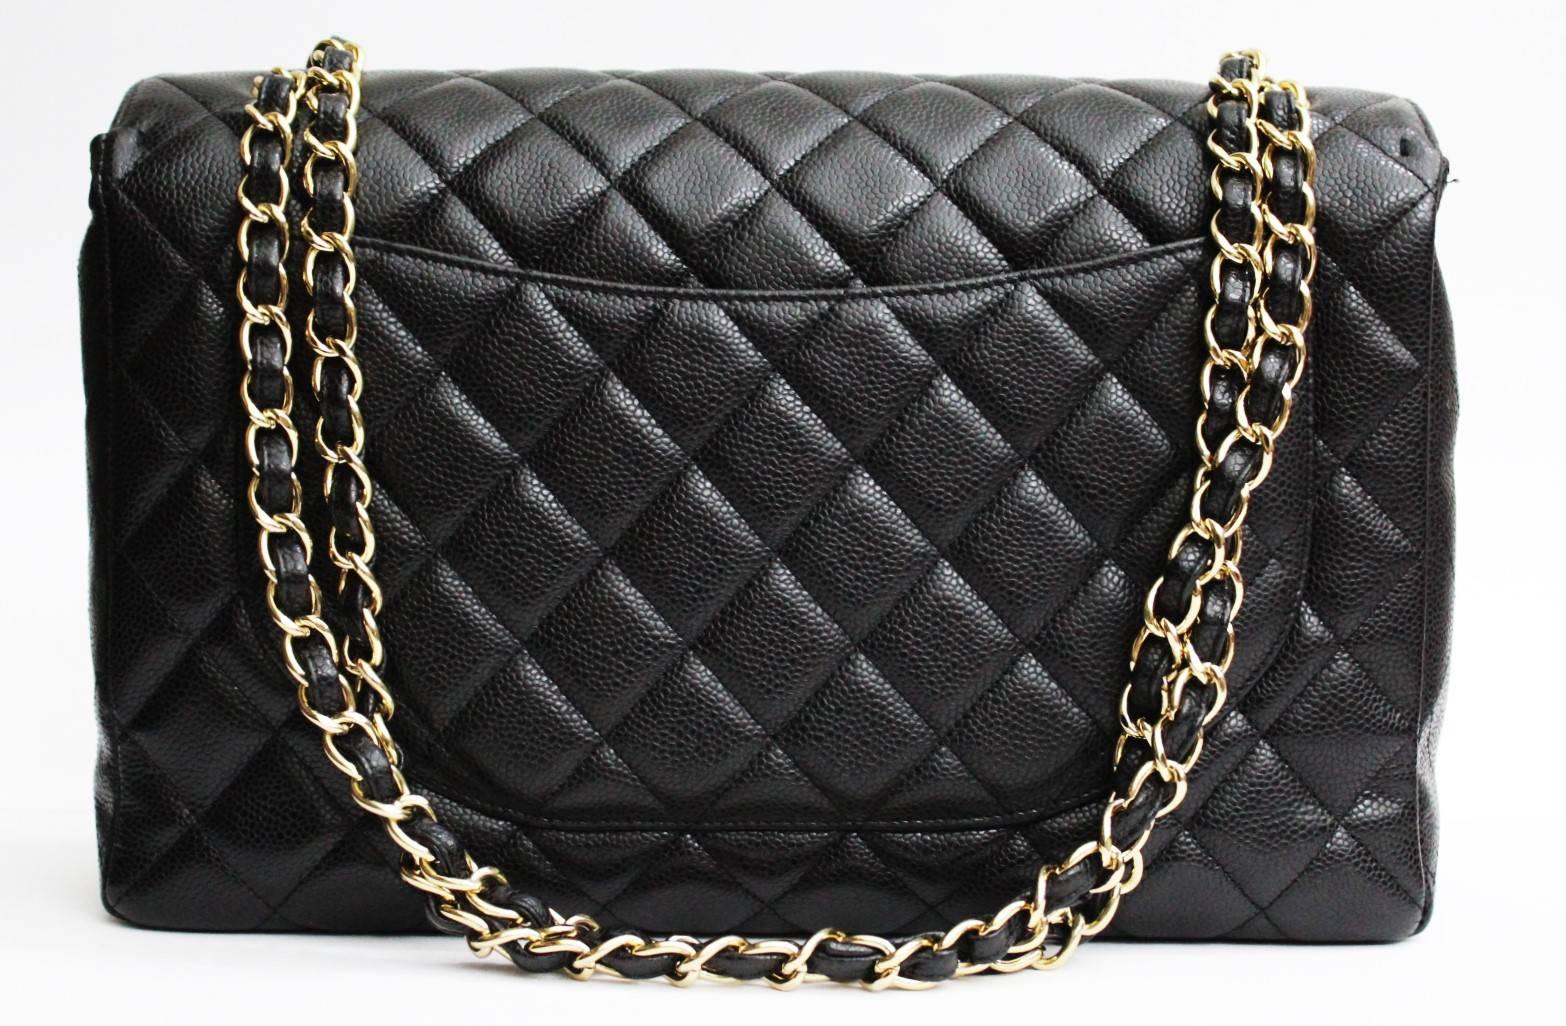 The beautiful Maxi Jumbo from the Chanel family. It is made with the hammered leather and gold hardware . The year is 2010. Excelent conditions with dustbag, box and card.